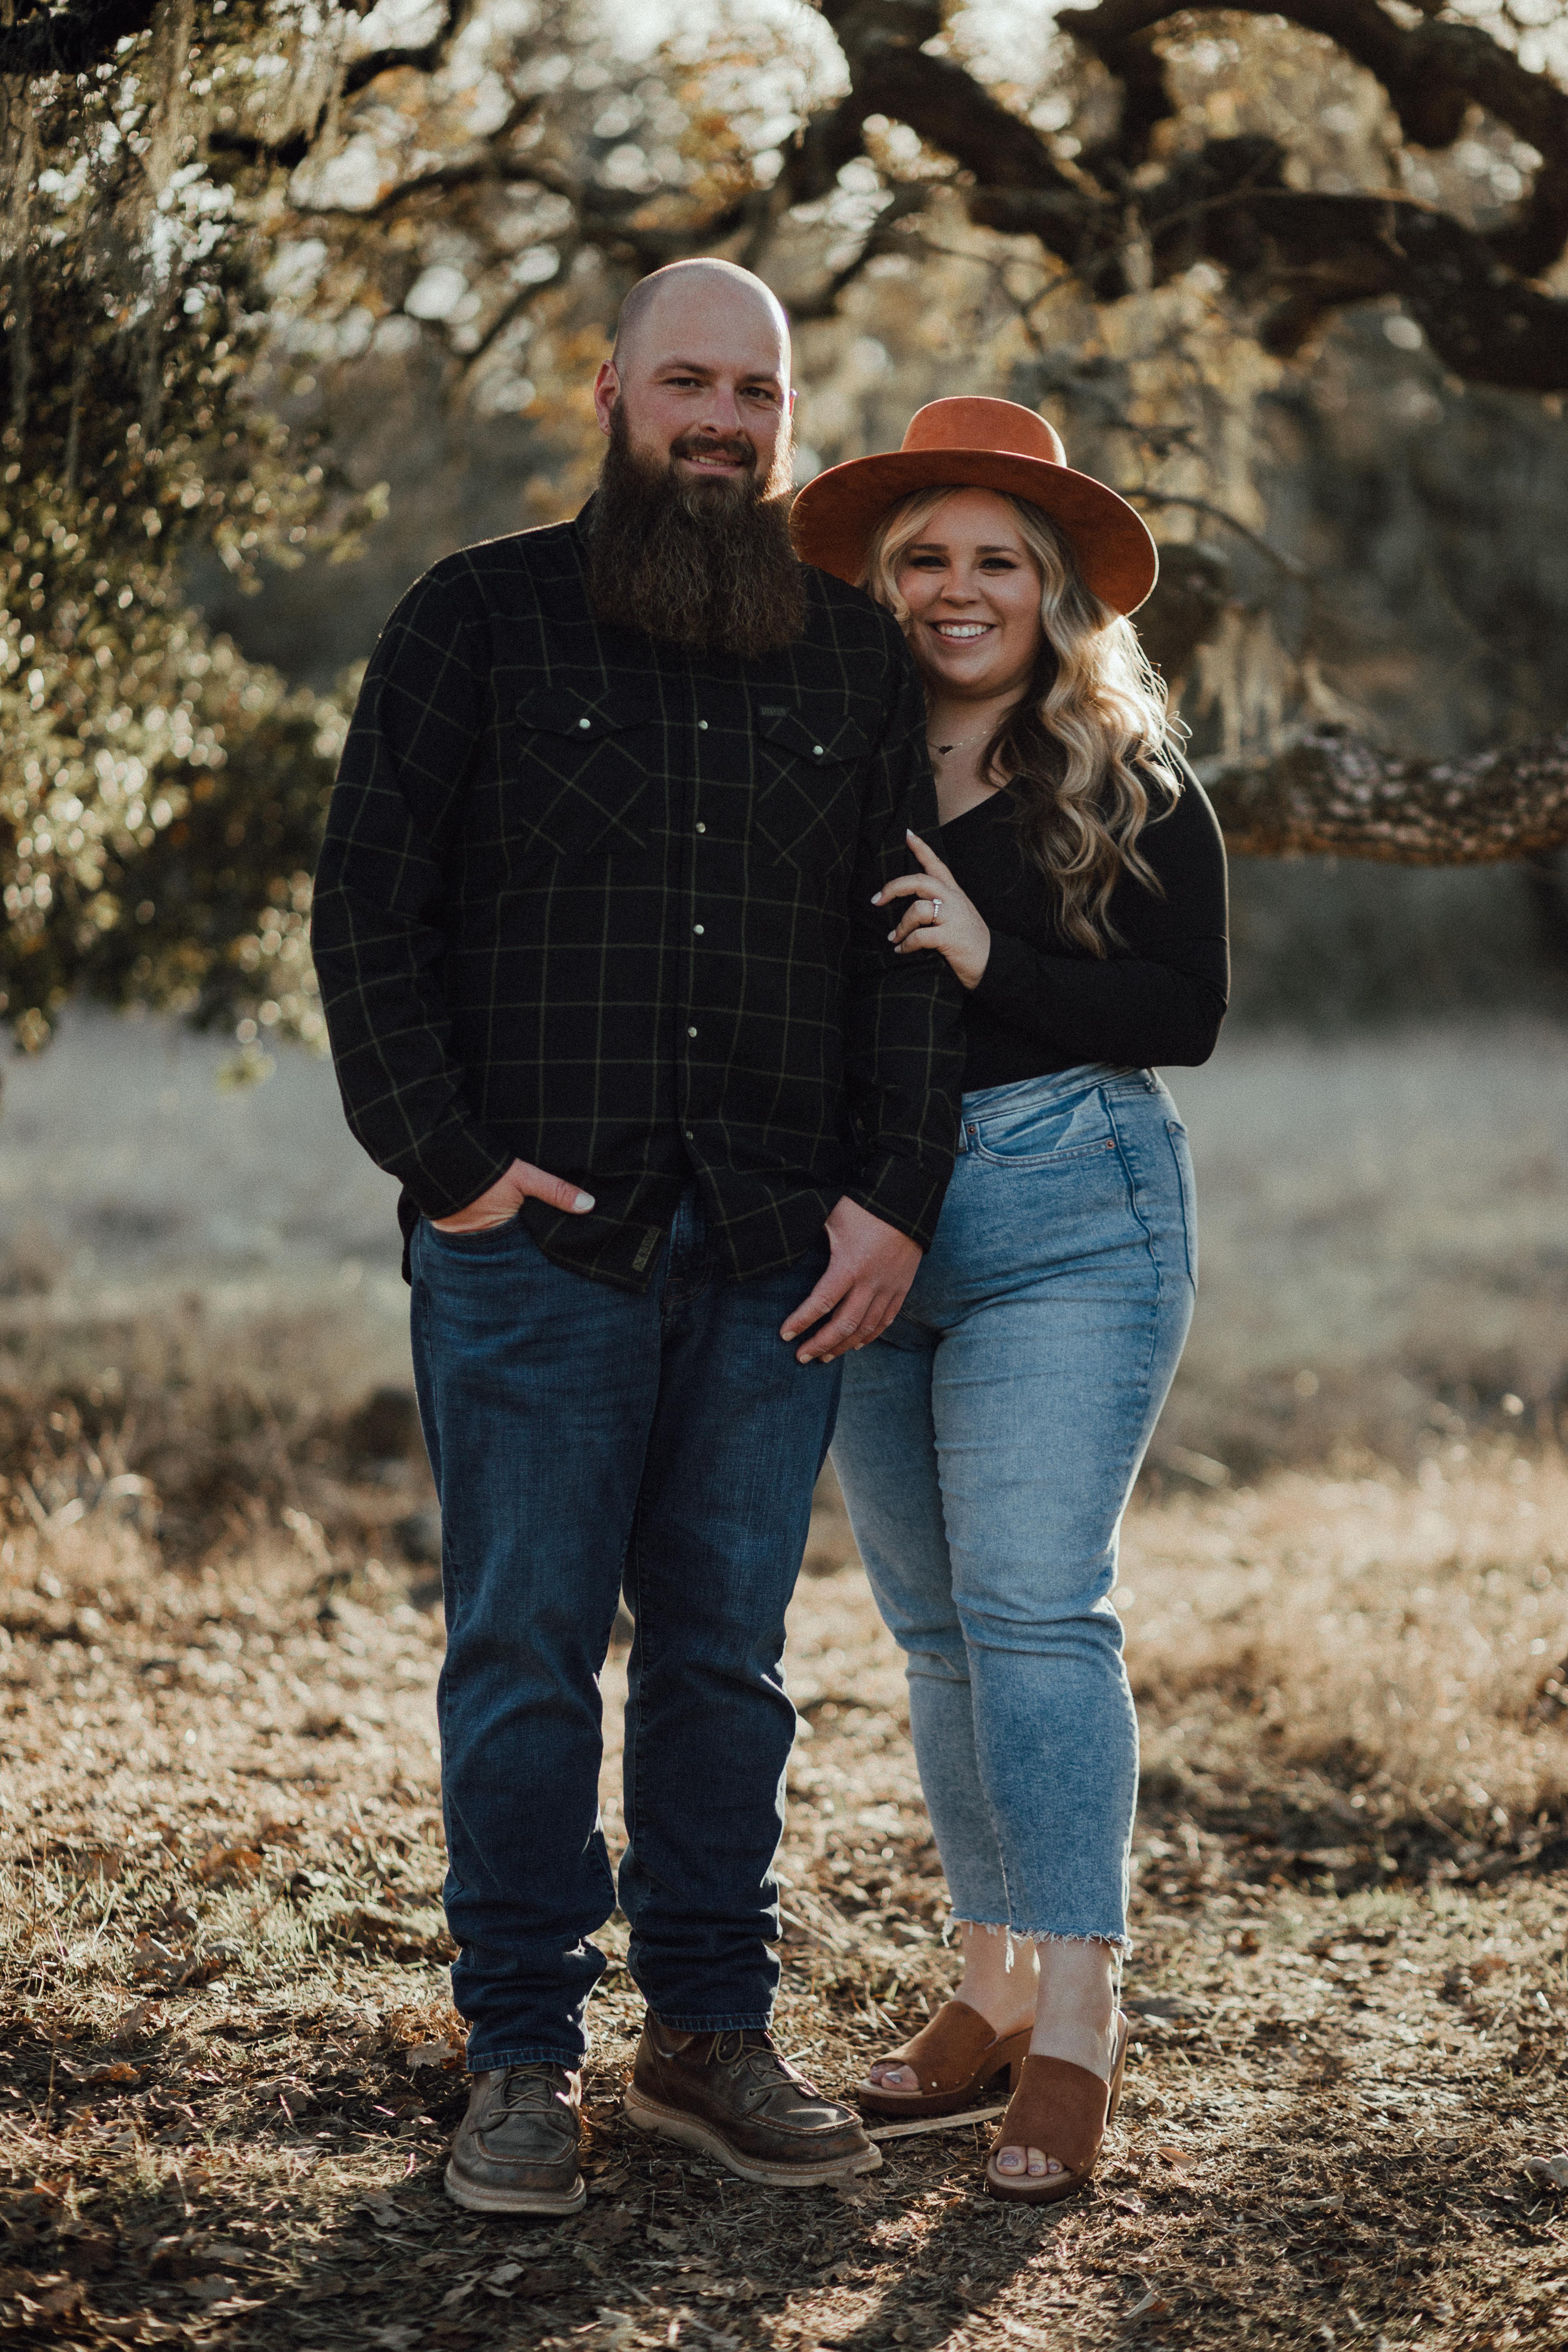 The Wedding Website of Haley Rearden and Andrew Rader